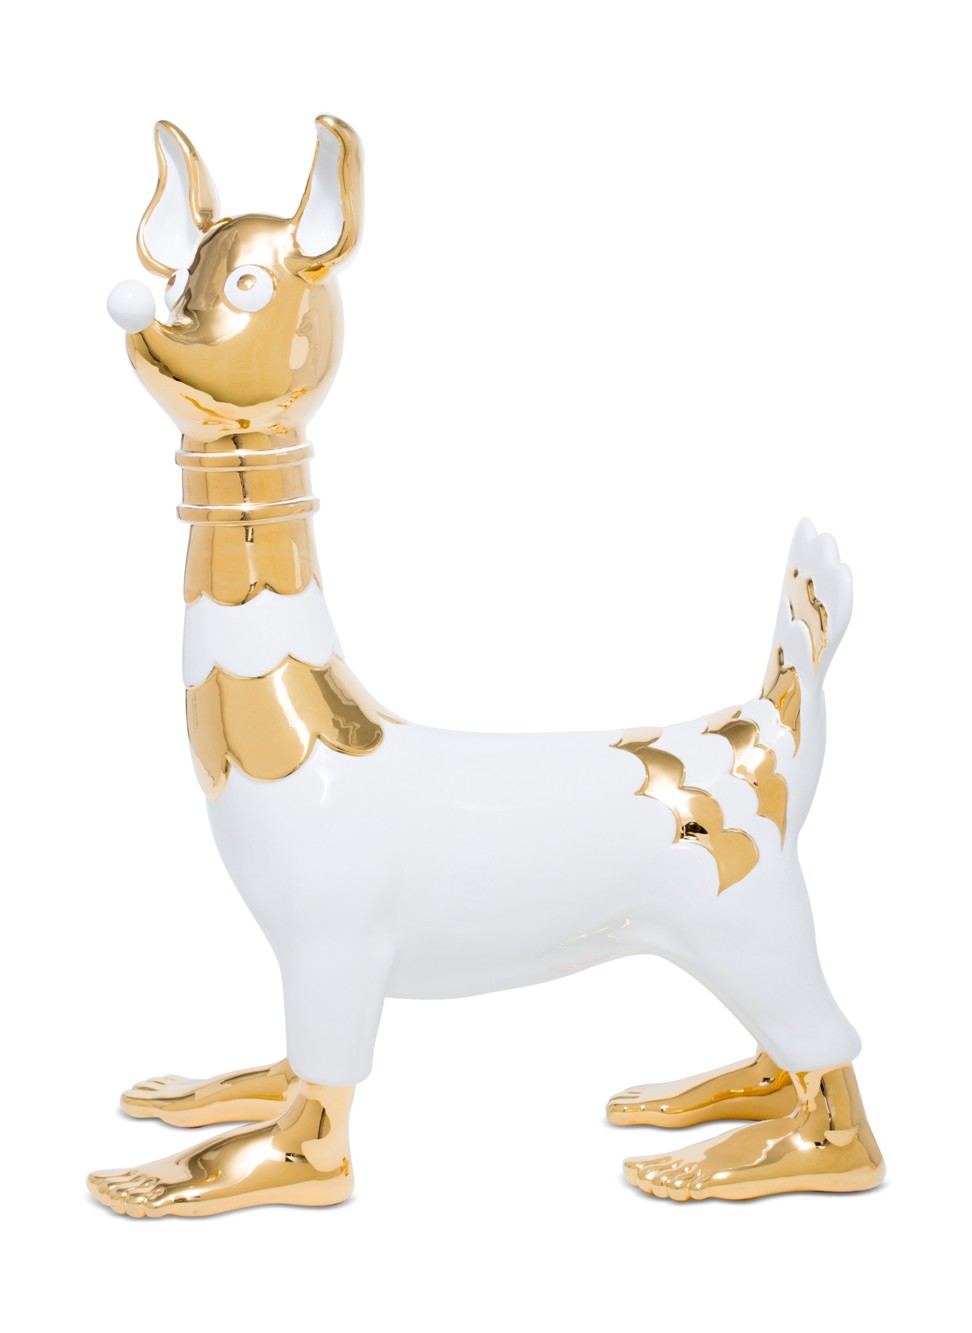 Matteo Cibic Studio. Made from white ceramic with 24ct gold finish, this limited-edition Luky Dog sculpture is 73cm tall. It is part of the II Paradiso dei Sogni collection, HK$16,800